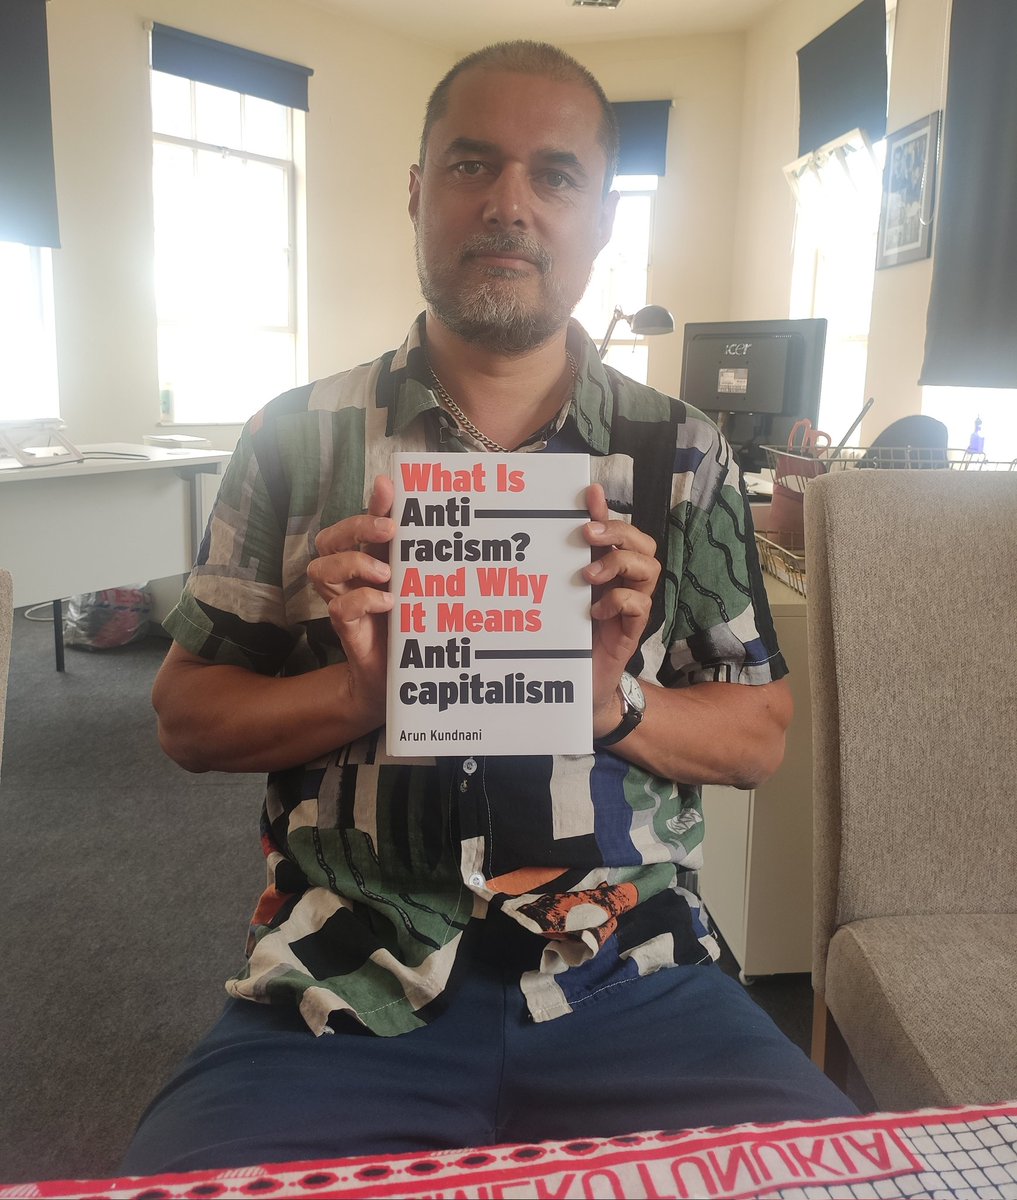 Great to have our former Editor and Race & Class Editorial Working Committee member @ArunKundnani drop in to @IRR_News with his exciting new book, 'What is Anti racism And Why It Means Anti capitalism' 

Order from @VersoBooks ⬇️
versobooks.com/en-gb/products…